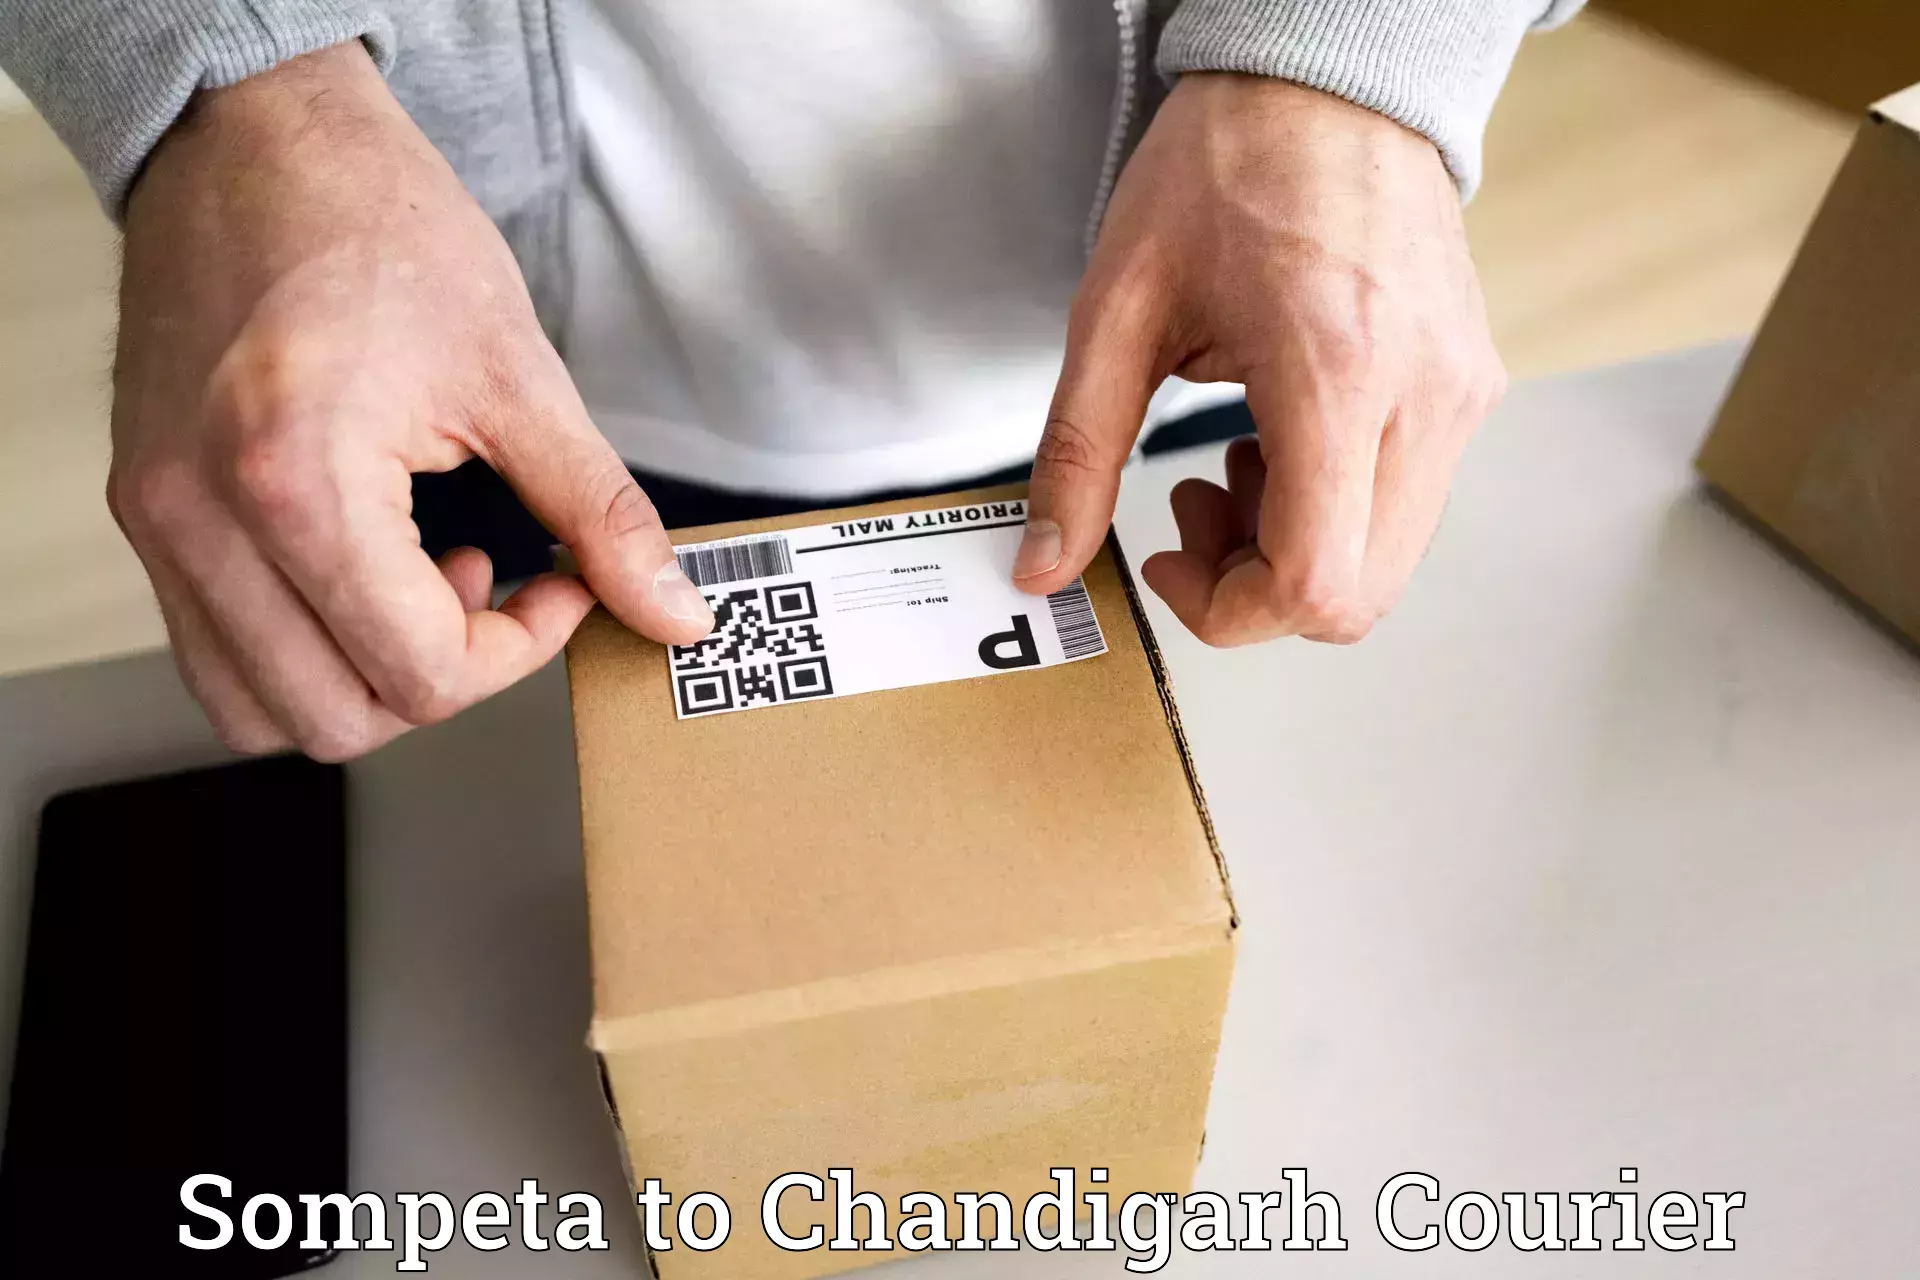 Custom courier packaging Sompeta to Chandigarh